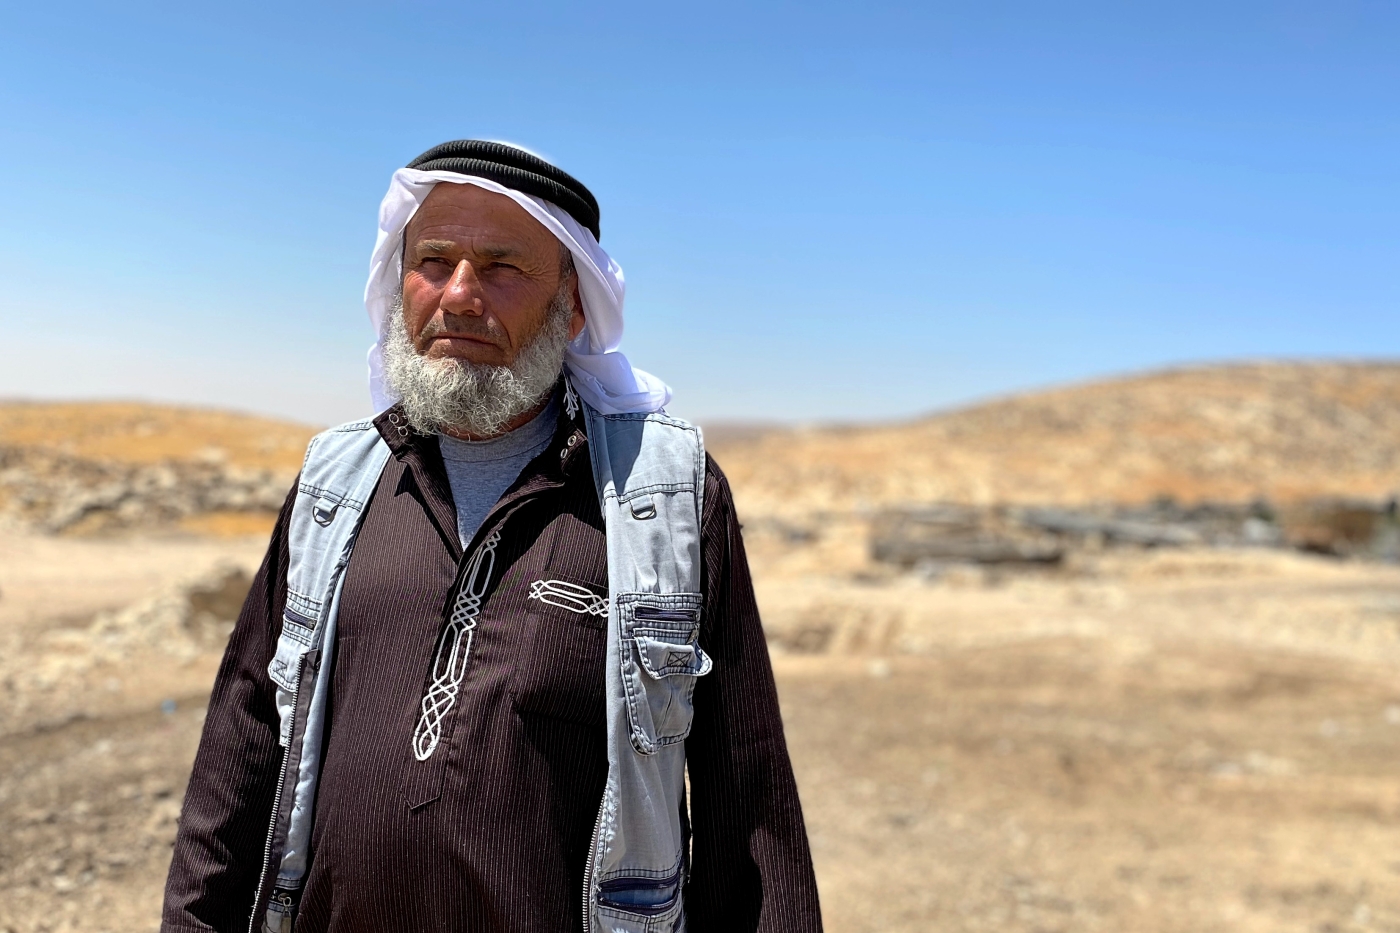 Ali Jabarin stands in Janba village in Masafer Yatta, a community of 2,500 Palestinians facing imminent expulsion by the Israeli army, on 19 June 2022. (MEE/Shatha Hammad)